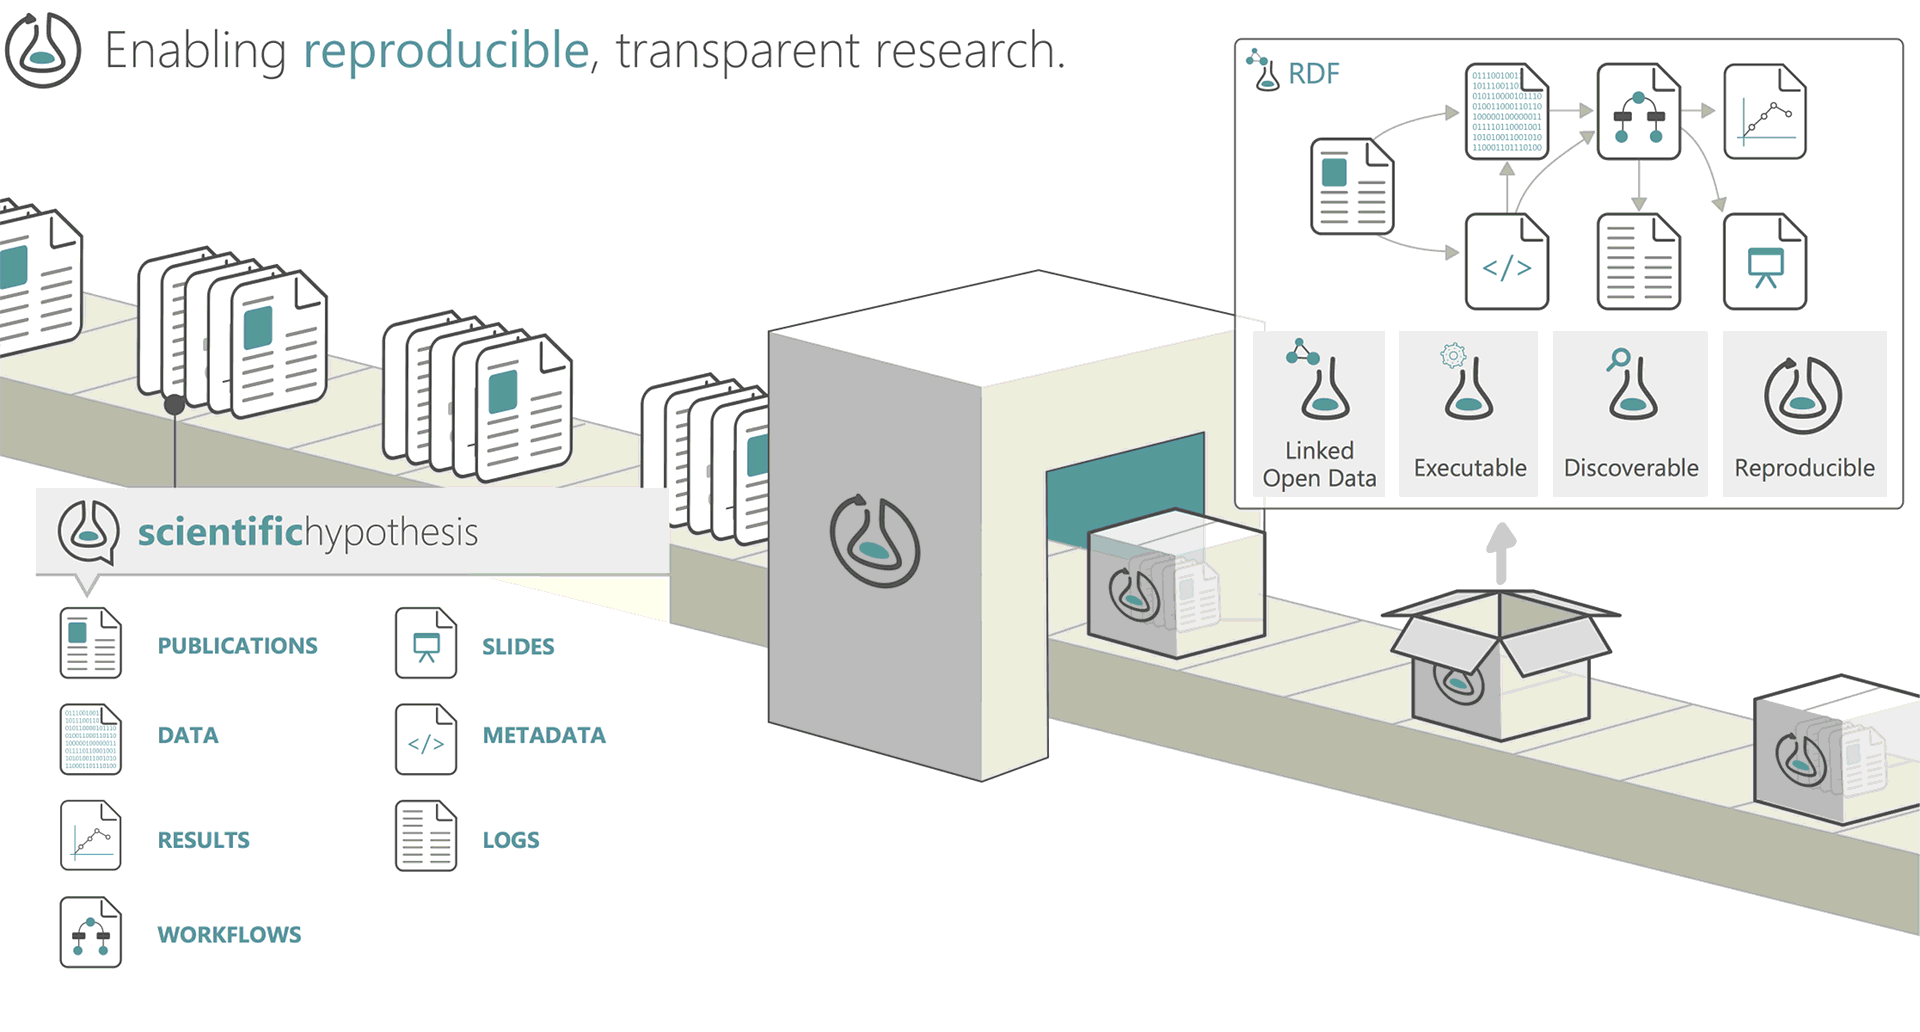 Research Object. Enabling reproducible, transparent research